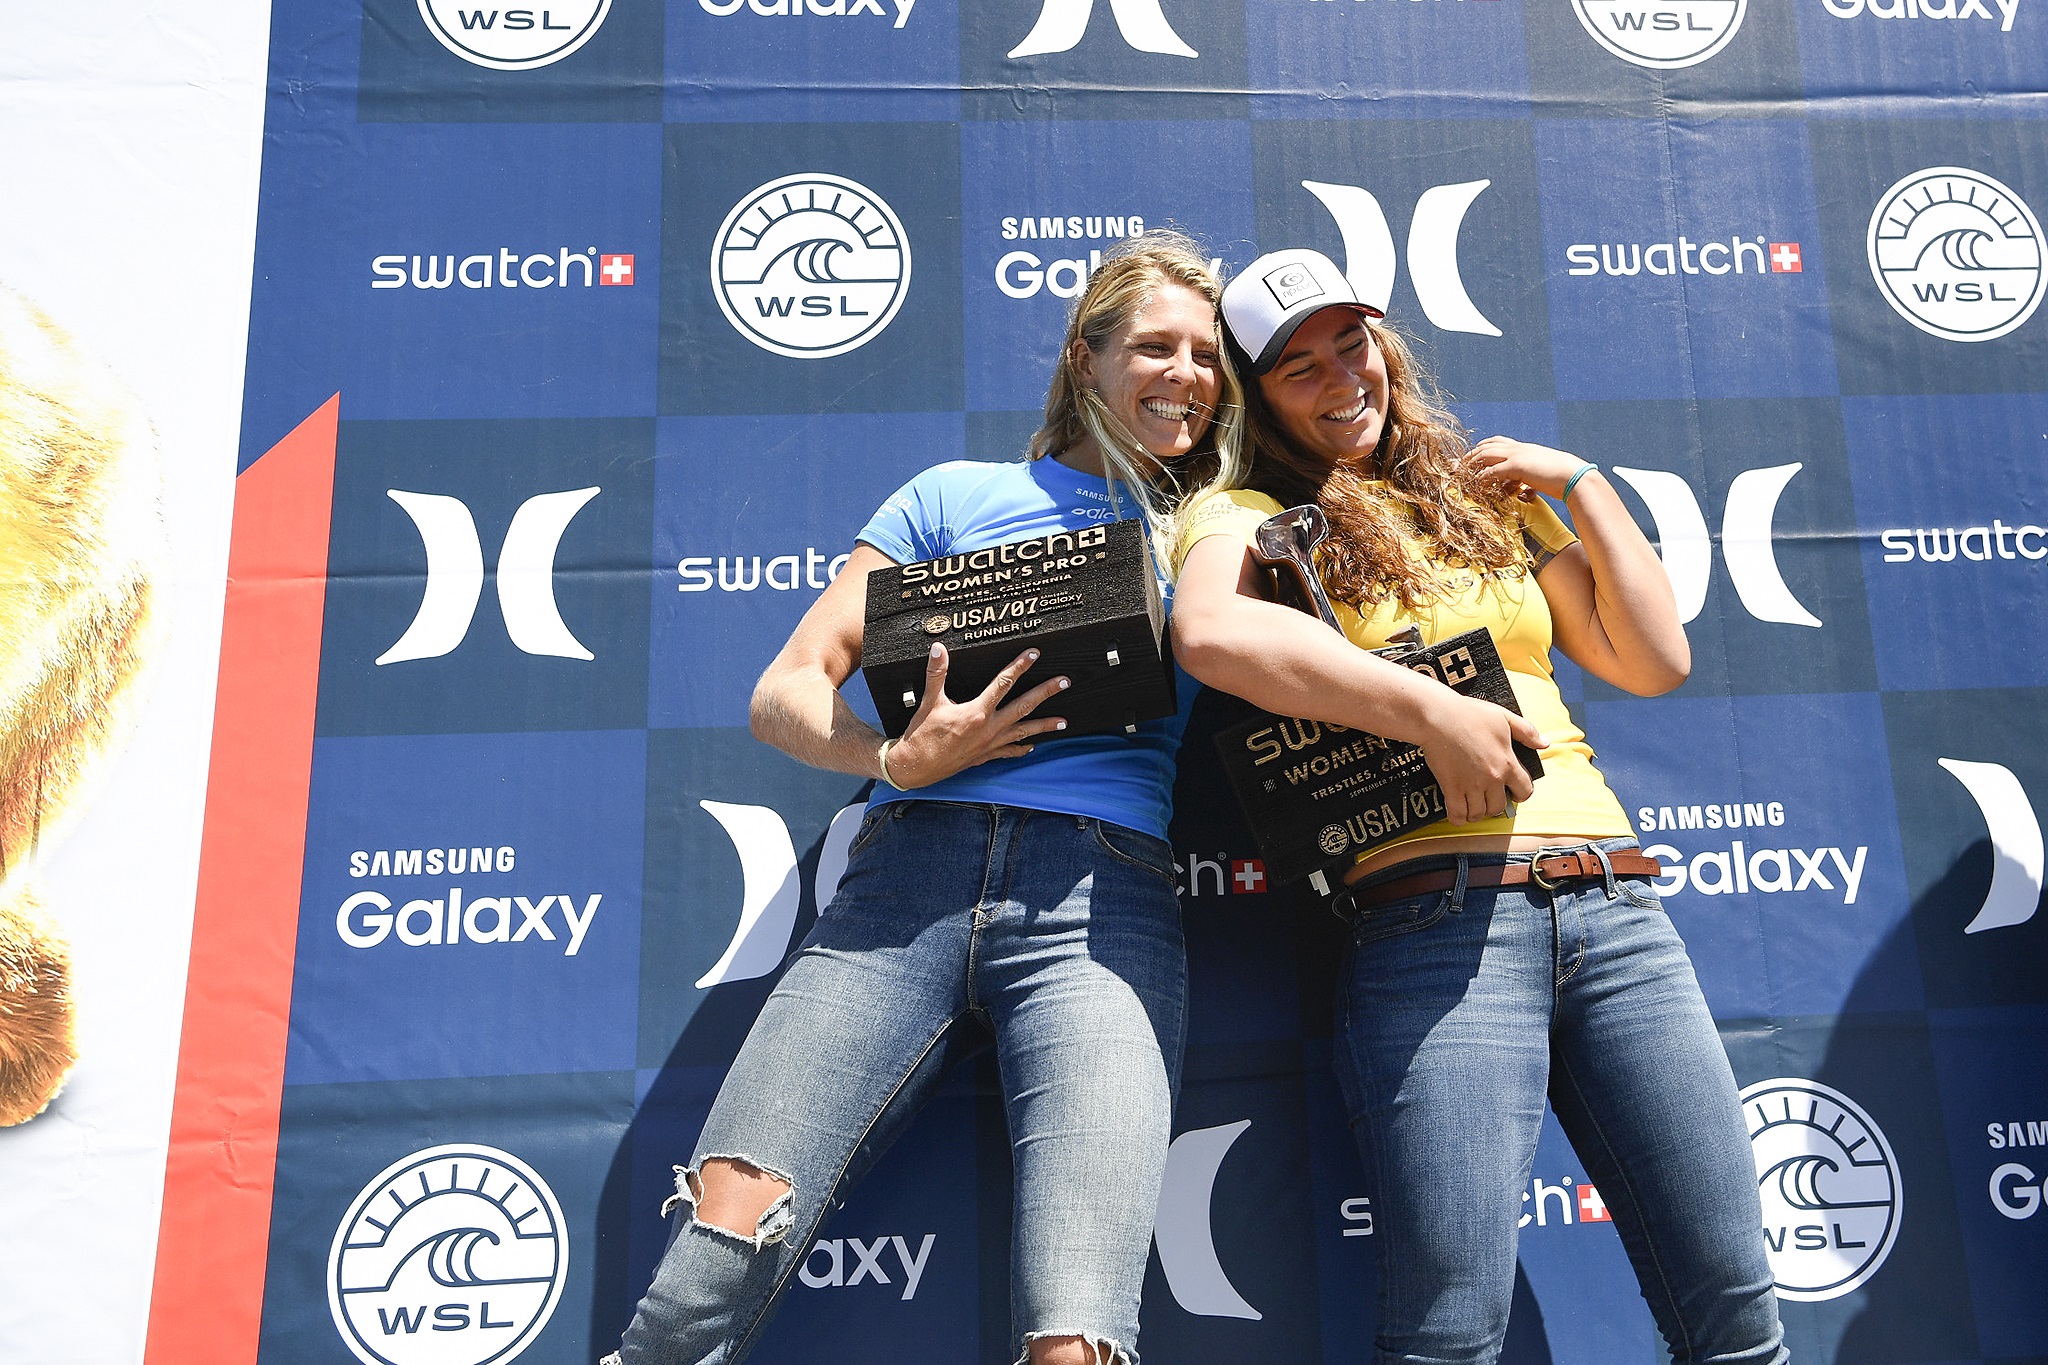 Tyler Wright is the 2016 Swatch Women's Pro WINNER and Stephanie Gilmore taking the runner-up placing.